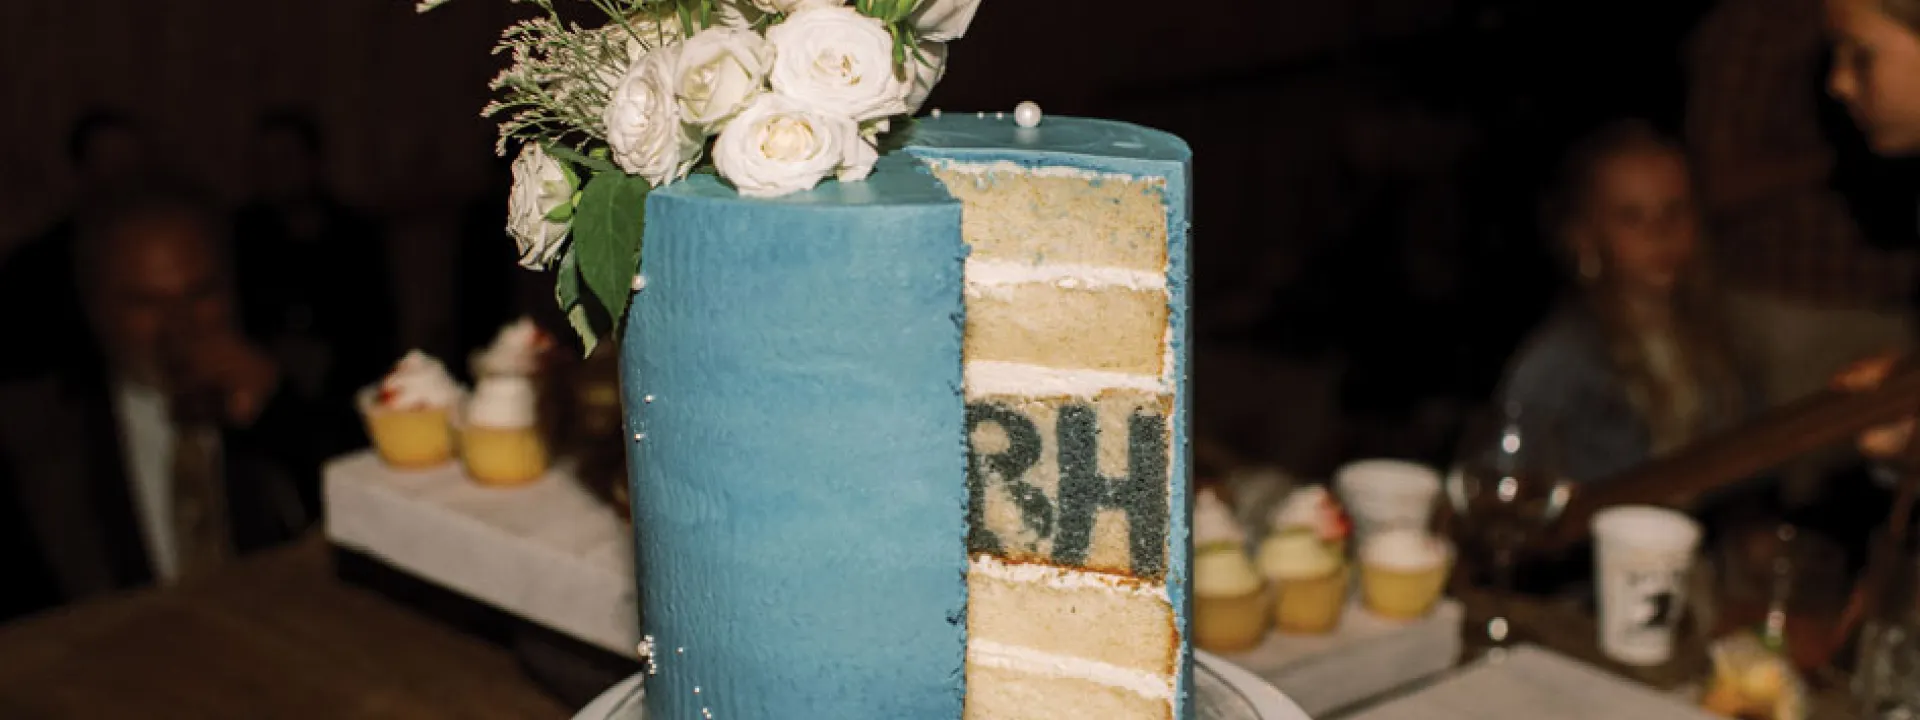 The bride and groom's initials are revealed when this wedding cake is cut open.